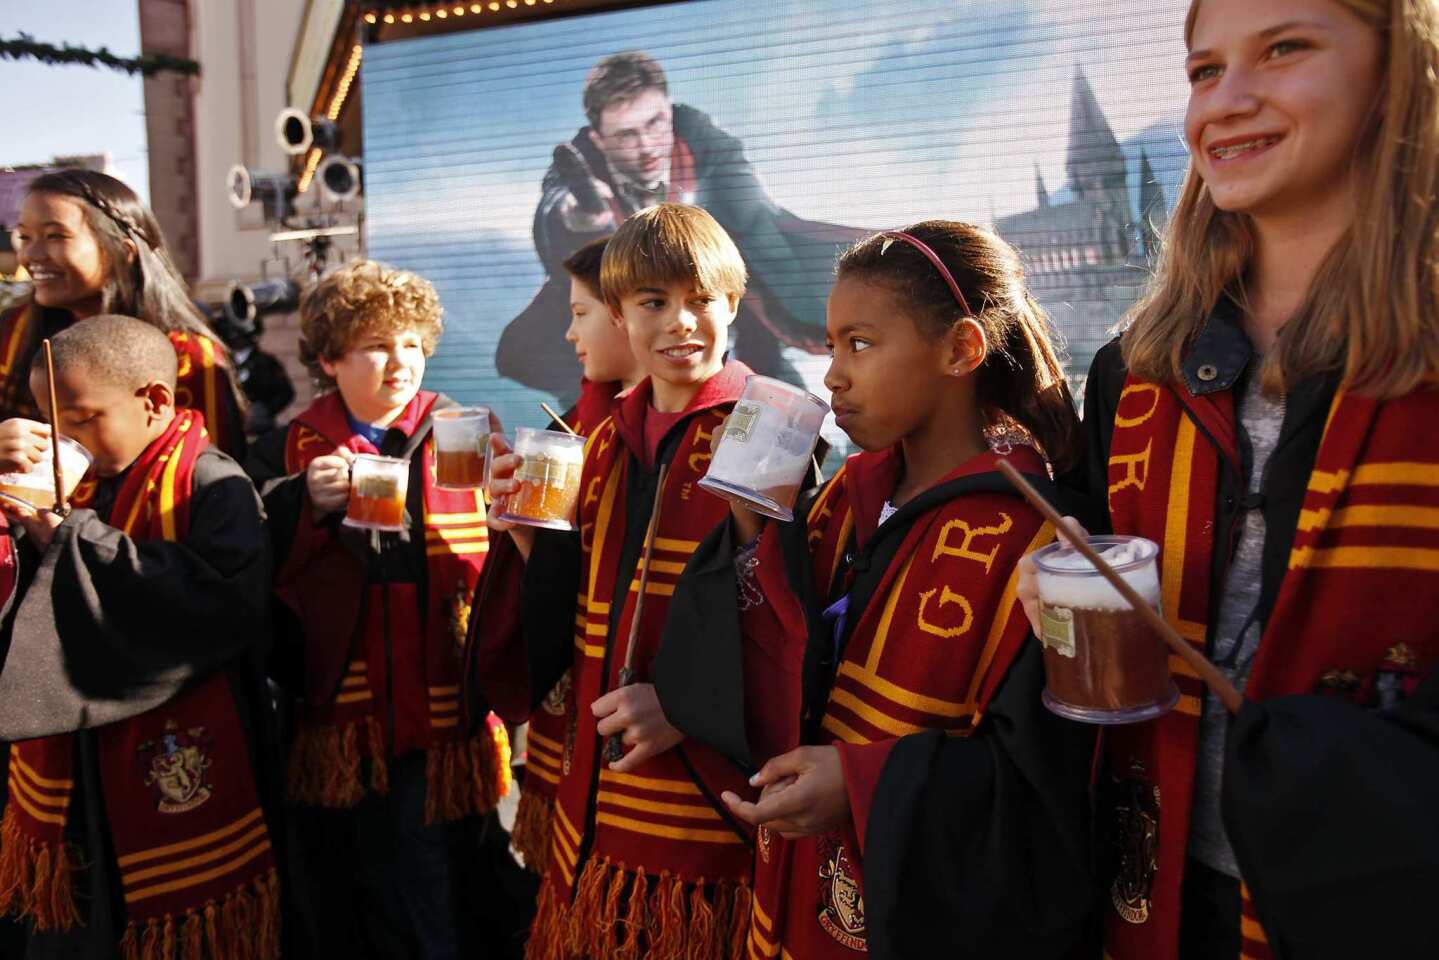 Studio execs and Gov. Jerry Brown joined the actors who play the Weasley twins in the "Harry Potter" films and a group of hardcore Potter fans in hoisting mugs of Butterbeer on Tuesday to celebrate the announcement that the Wizarding World of Harry Potter will be opening at Universal Studios Hollywood. The attraction has been a blockbuster success for the theme park in Orlando, so it makes sense to transpose it to the West Coast. The park renovation will include construction of Hogwarts Castle and will generate an estimated 1,000 jobs.